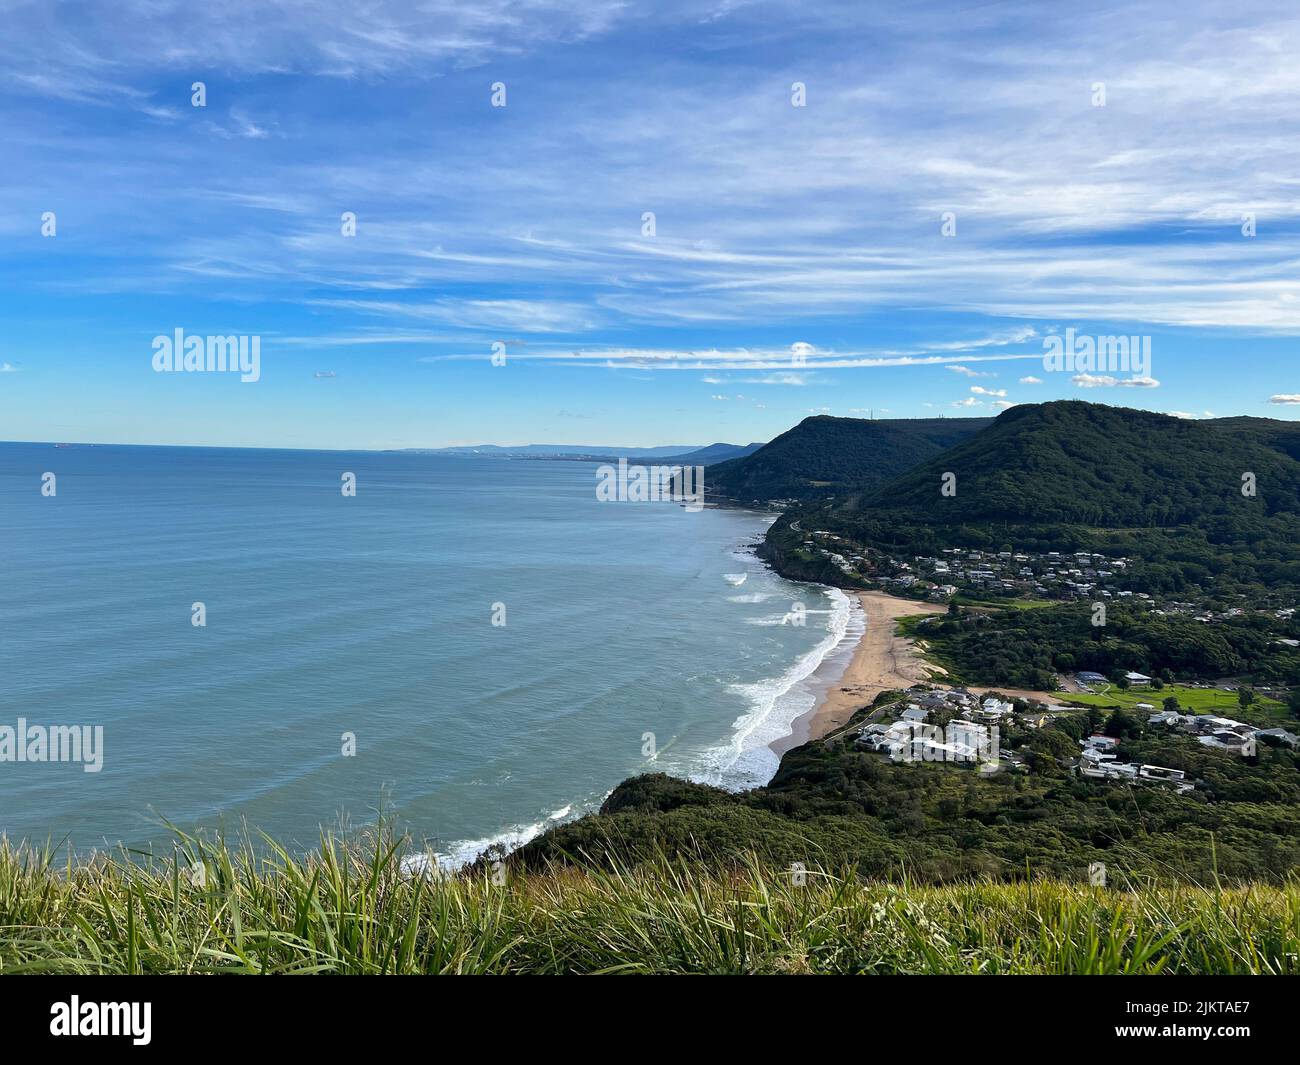 Scenic view of the coastline of Stanwell Park from Bald Hill Lookout, New South Wales, Australia, on the blue sky background Stock Photo